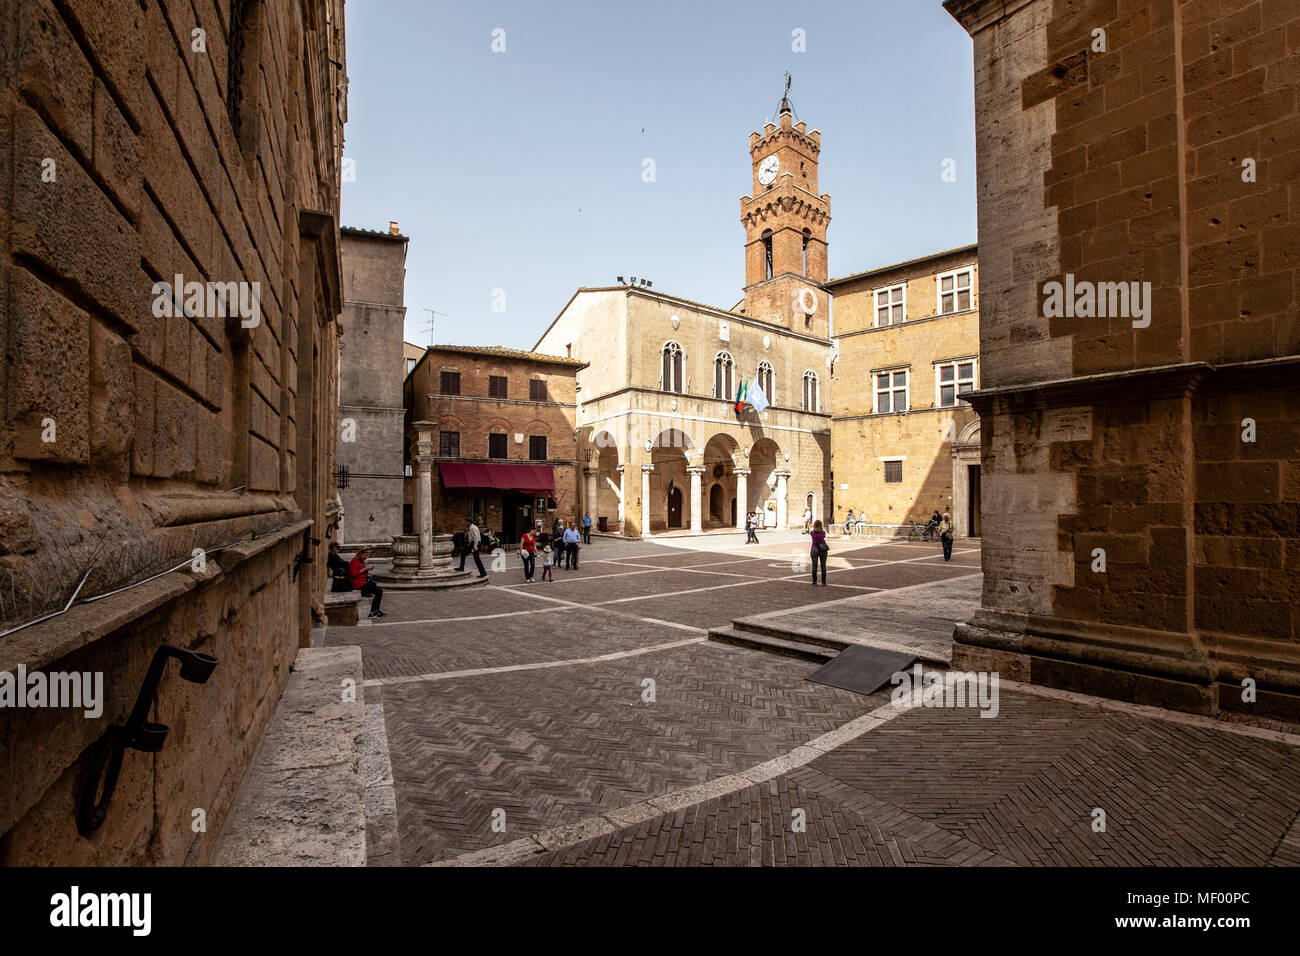 Old town with the bell tower of the city administration Pienza, Tuscany, Italy Stock Photo